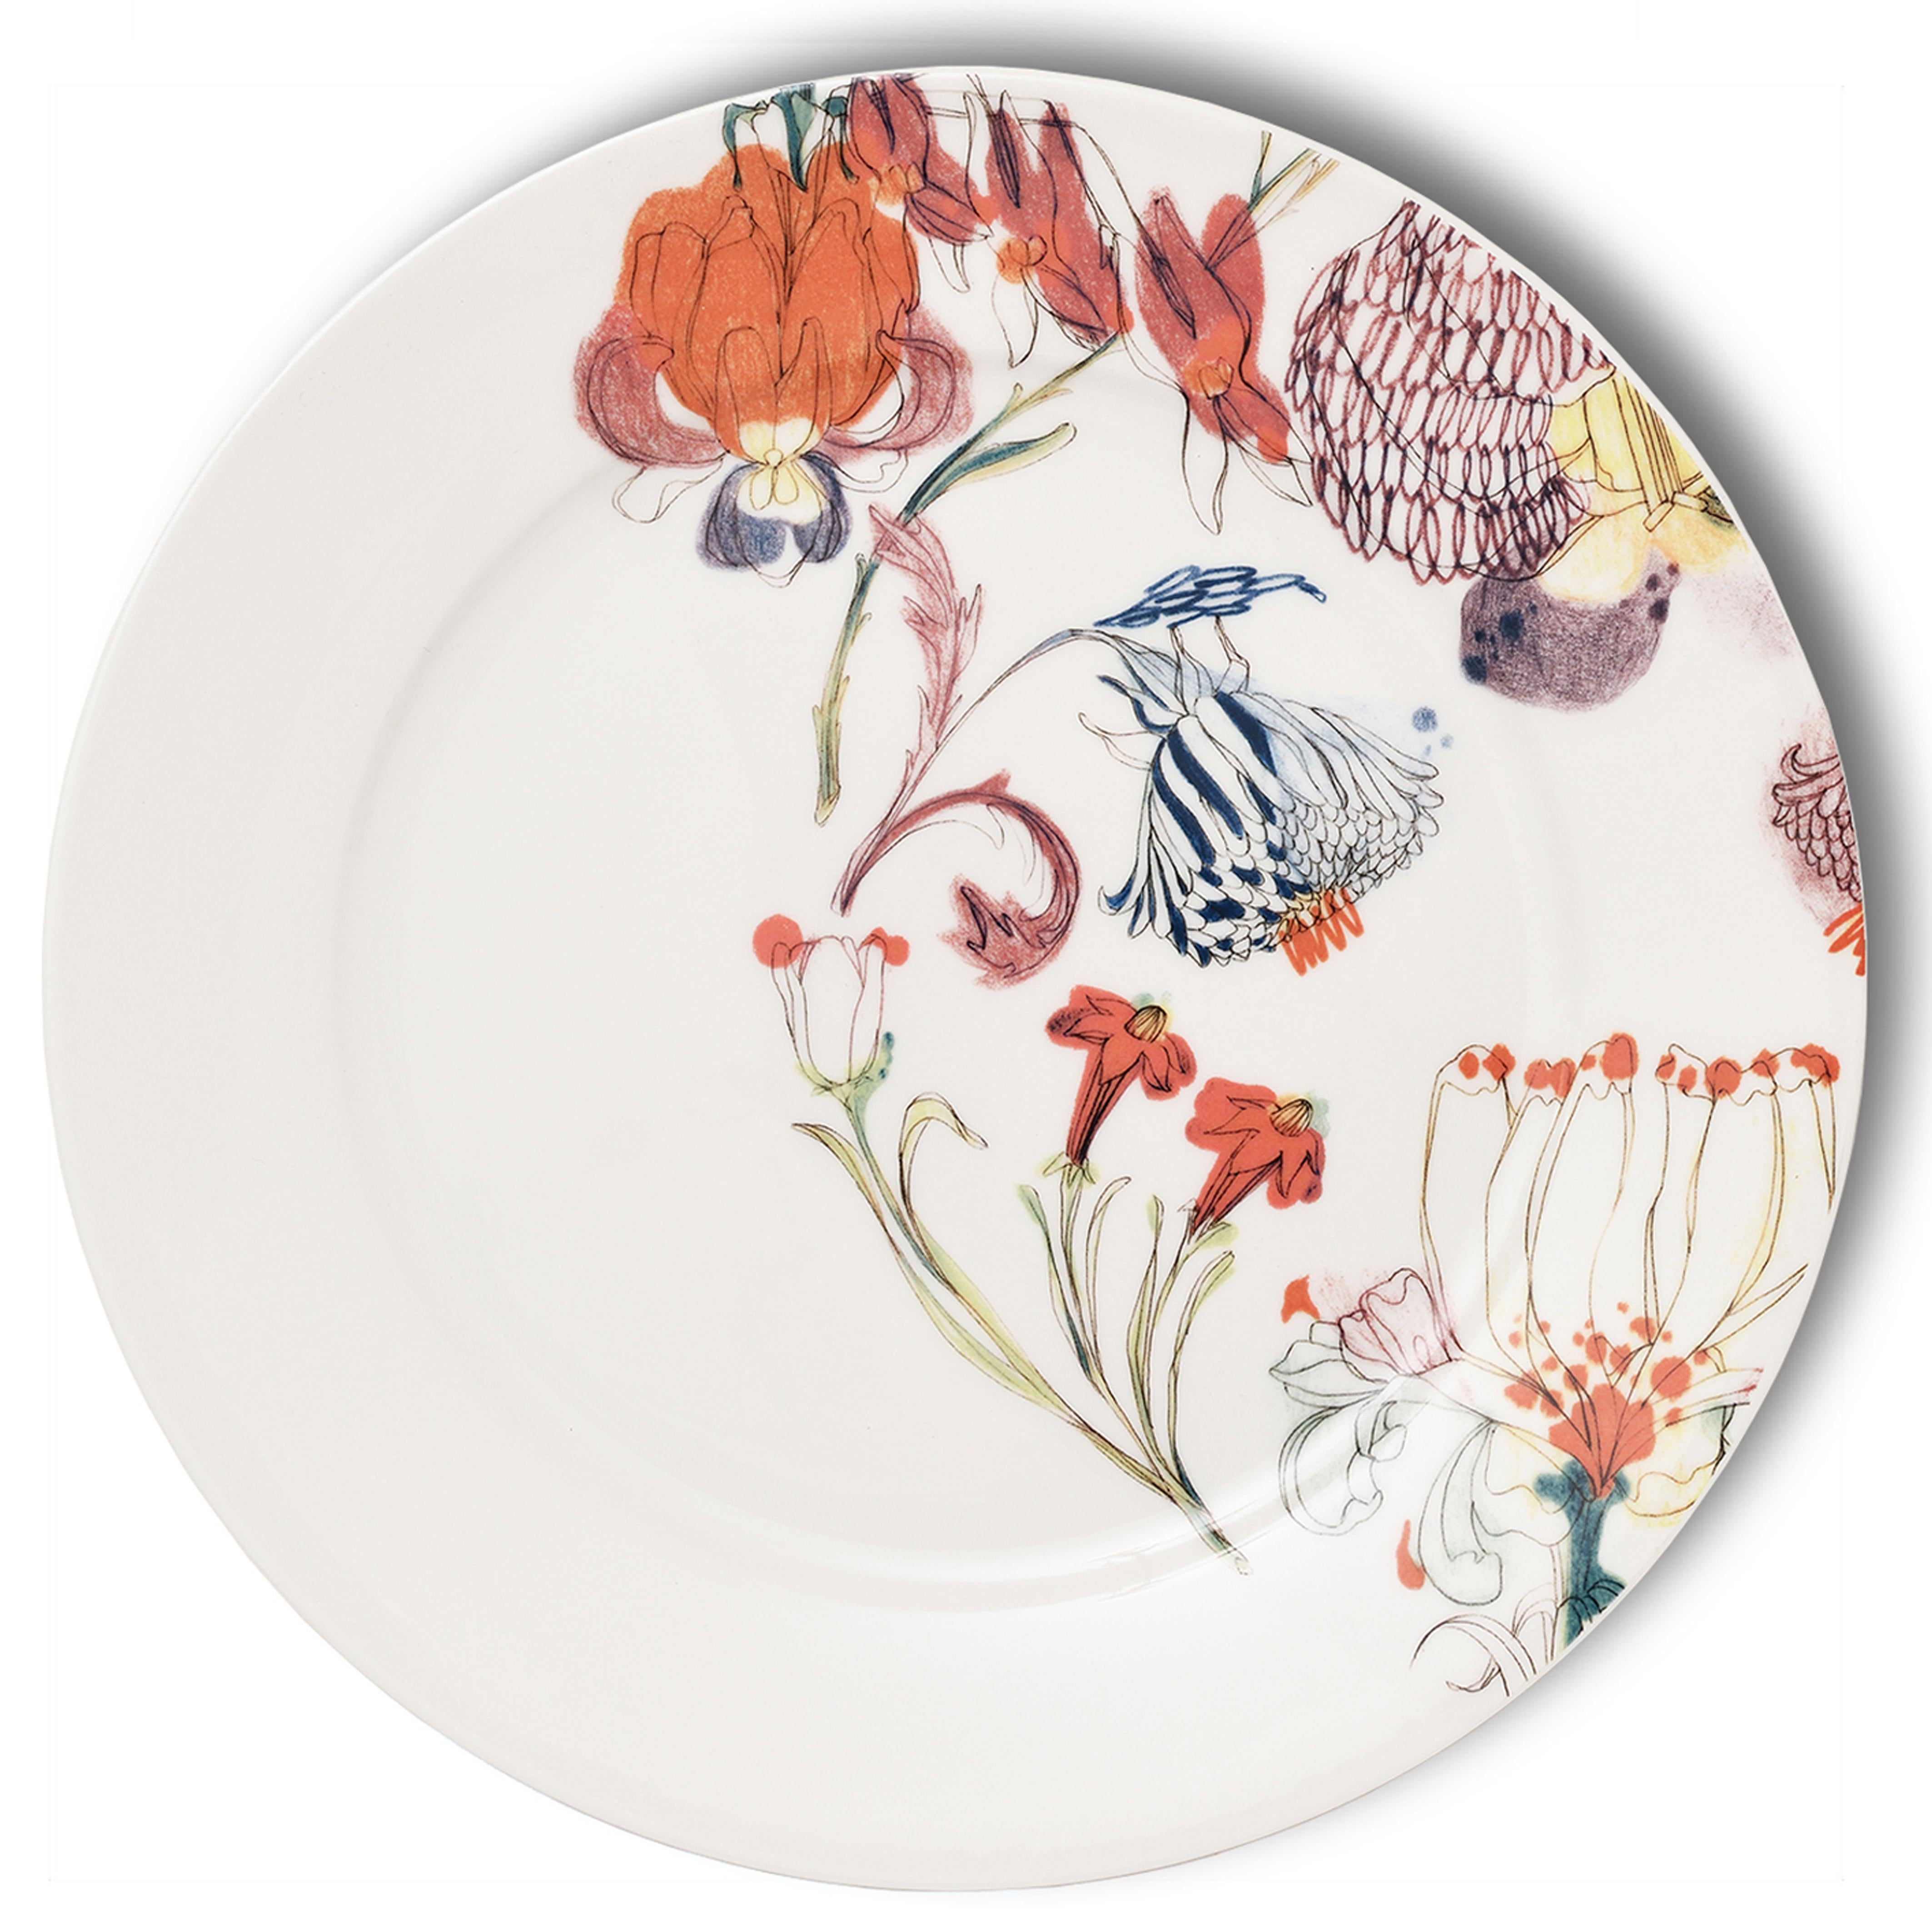 If you are looking for an unique tableware in order to make your dinner special and chic every day, this 